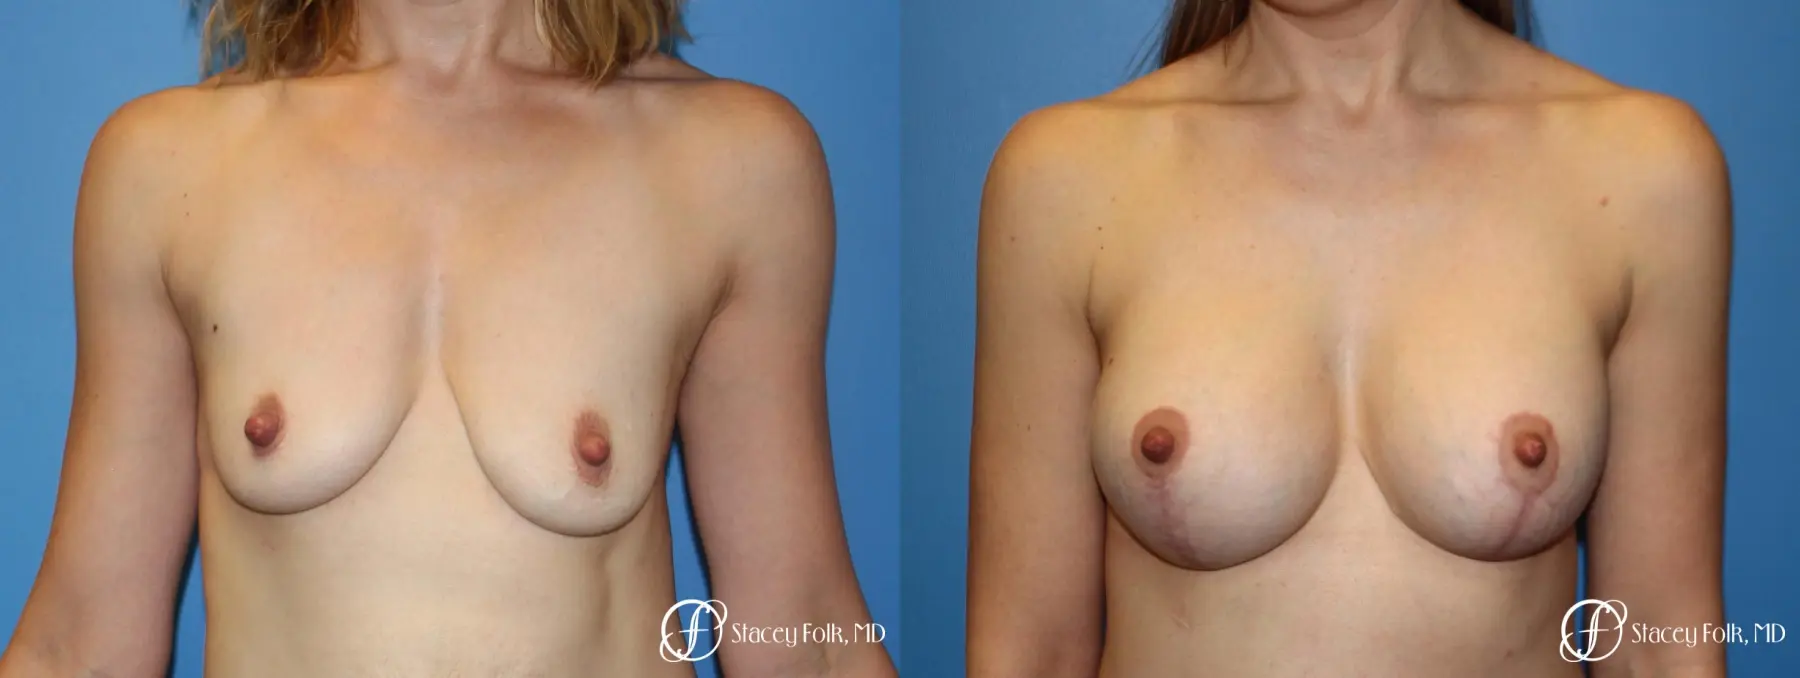 Denver Breast lift and Augmentation 7850 - Before and After 1